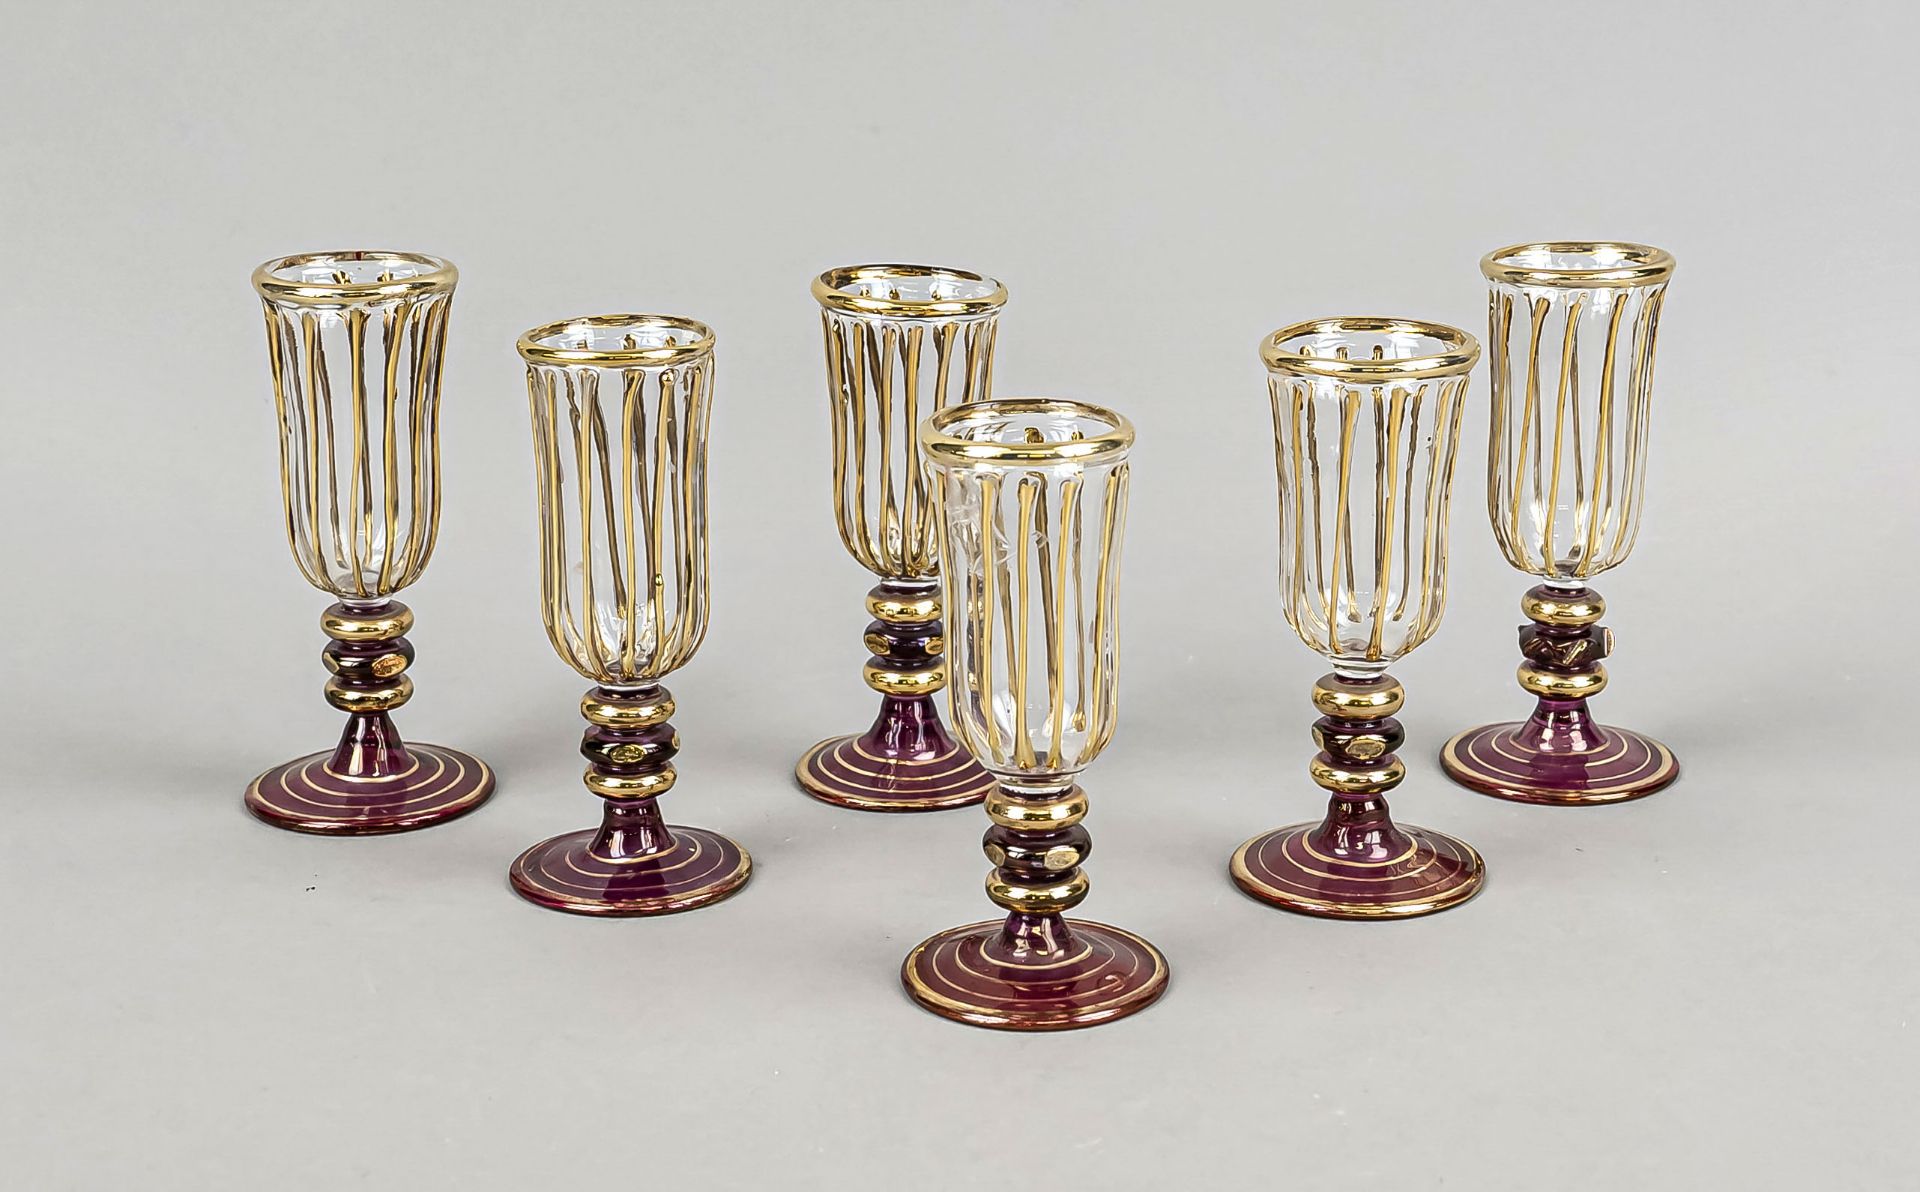 Six liqueur glasses, 20th century, round disk stand, jointed stem, cylindrical body, clear glass,